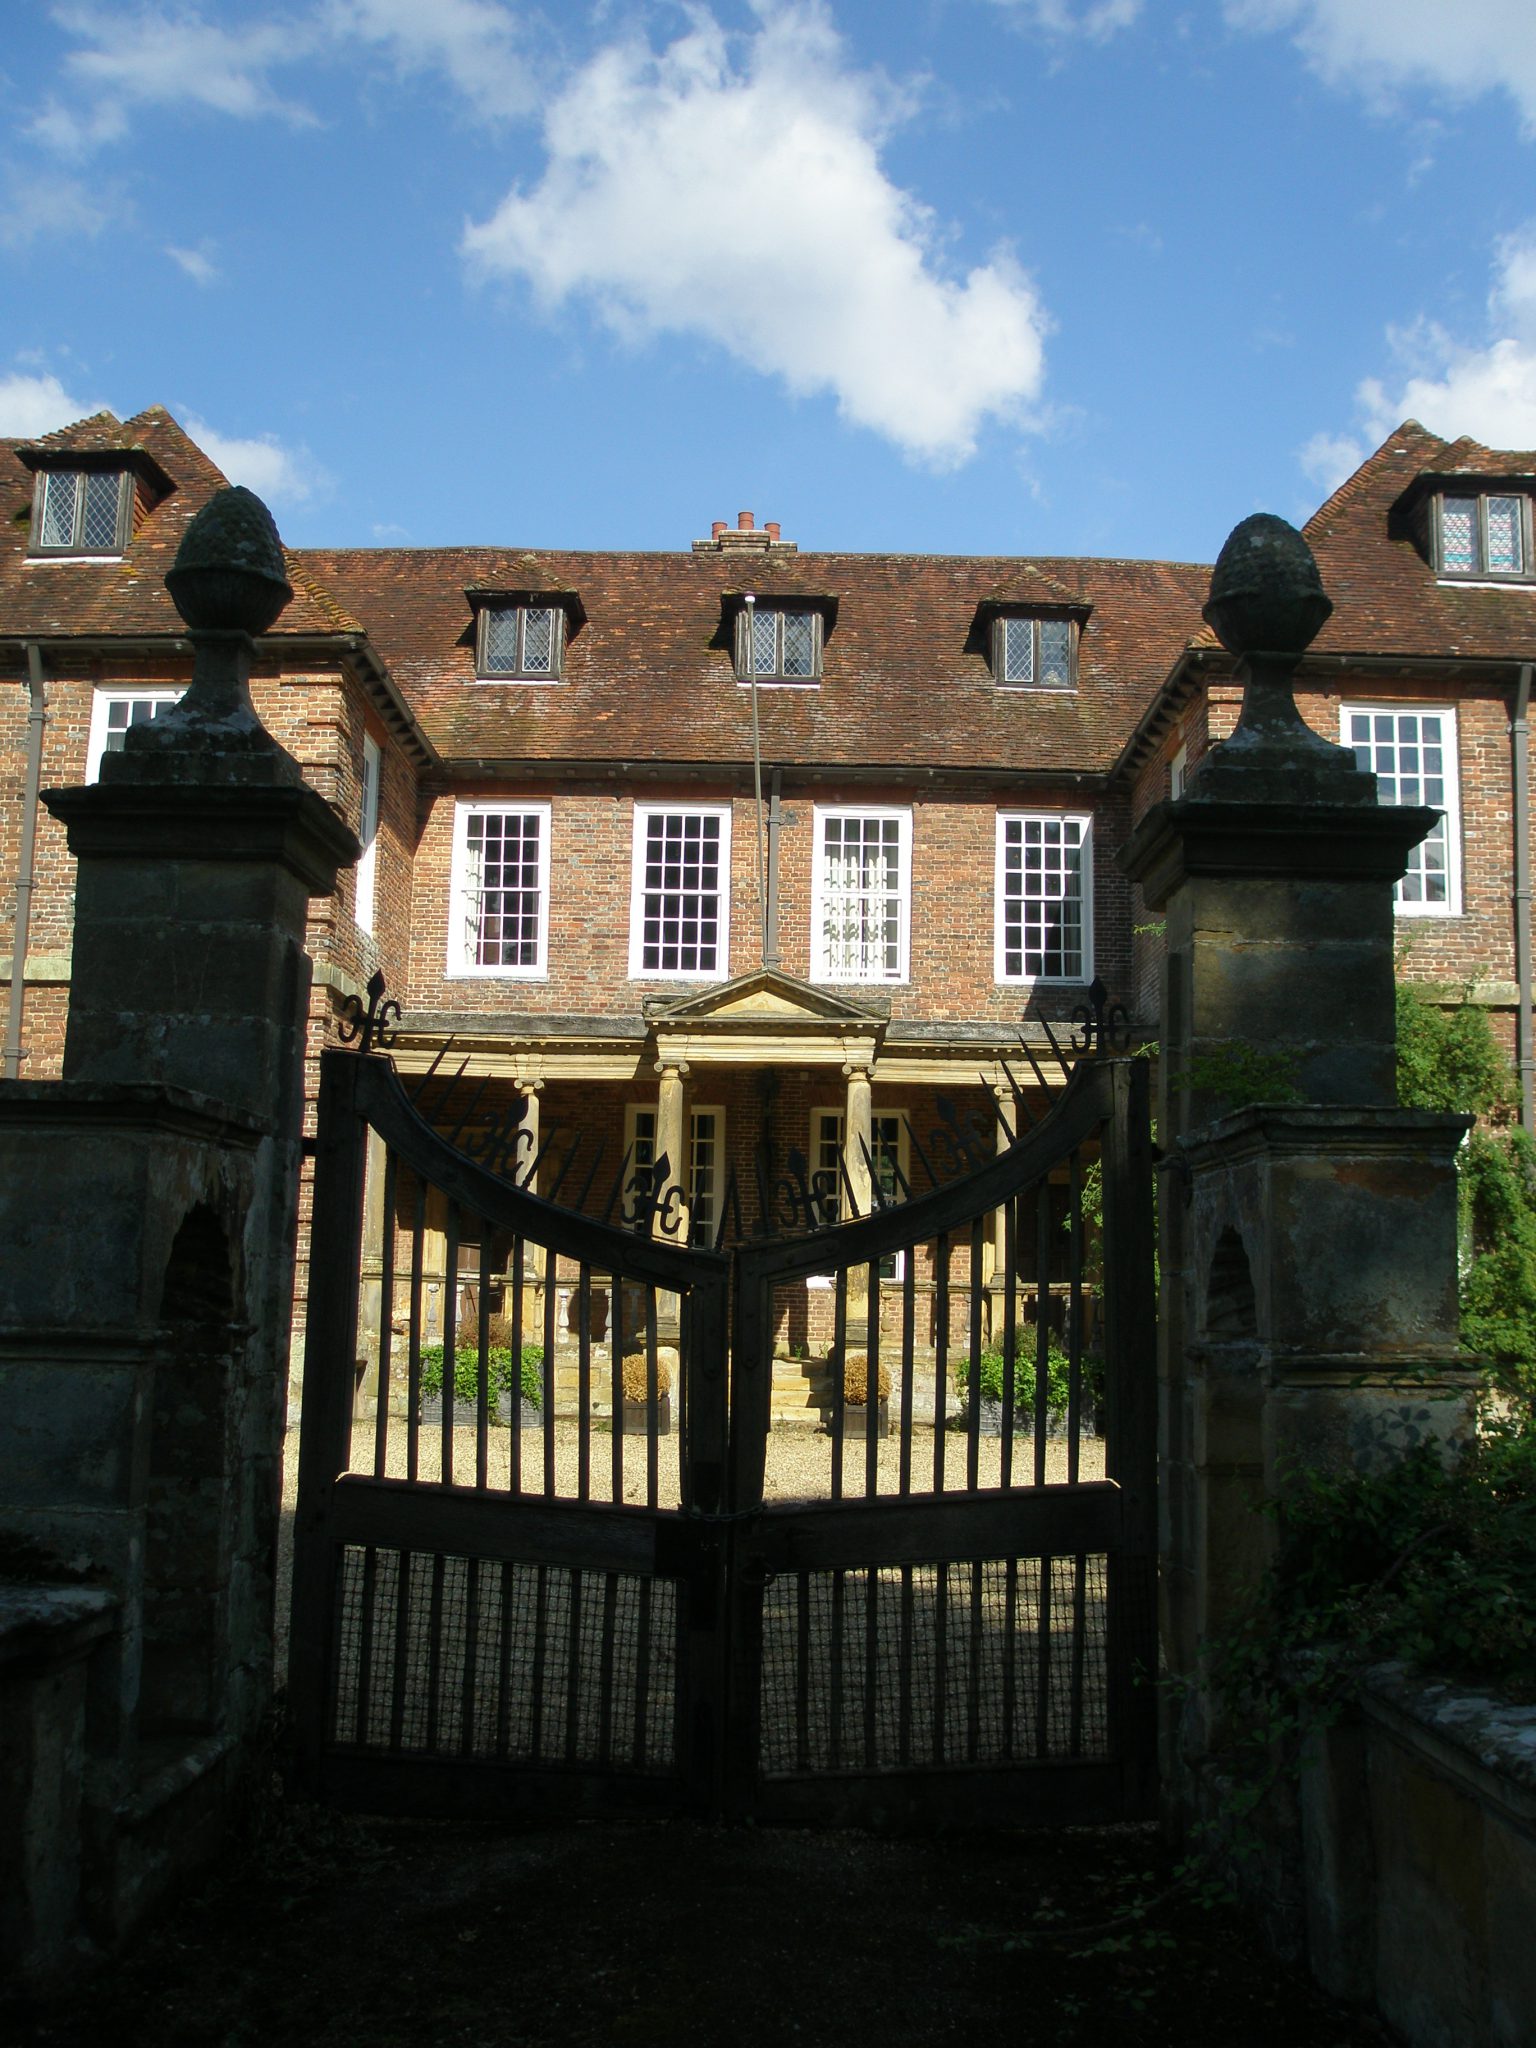 My final look at the forlorn but charming Manor House, at Groombridge Place...but it DOES look a bit haunted, doesn't it?